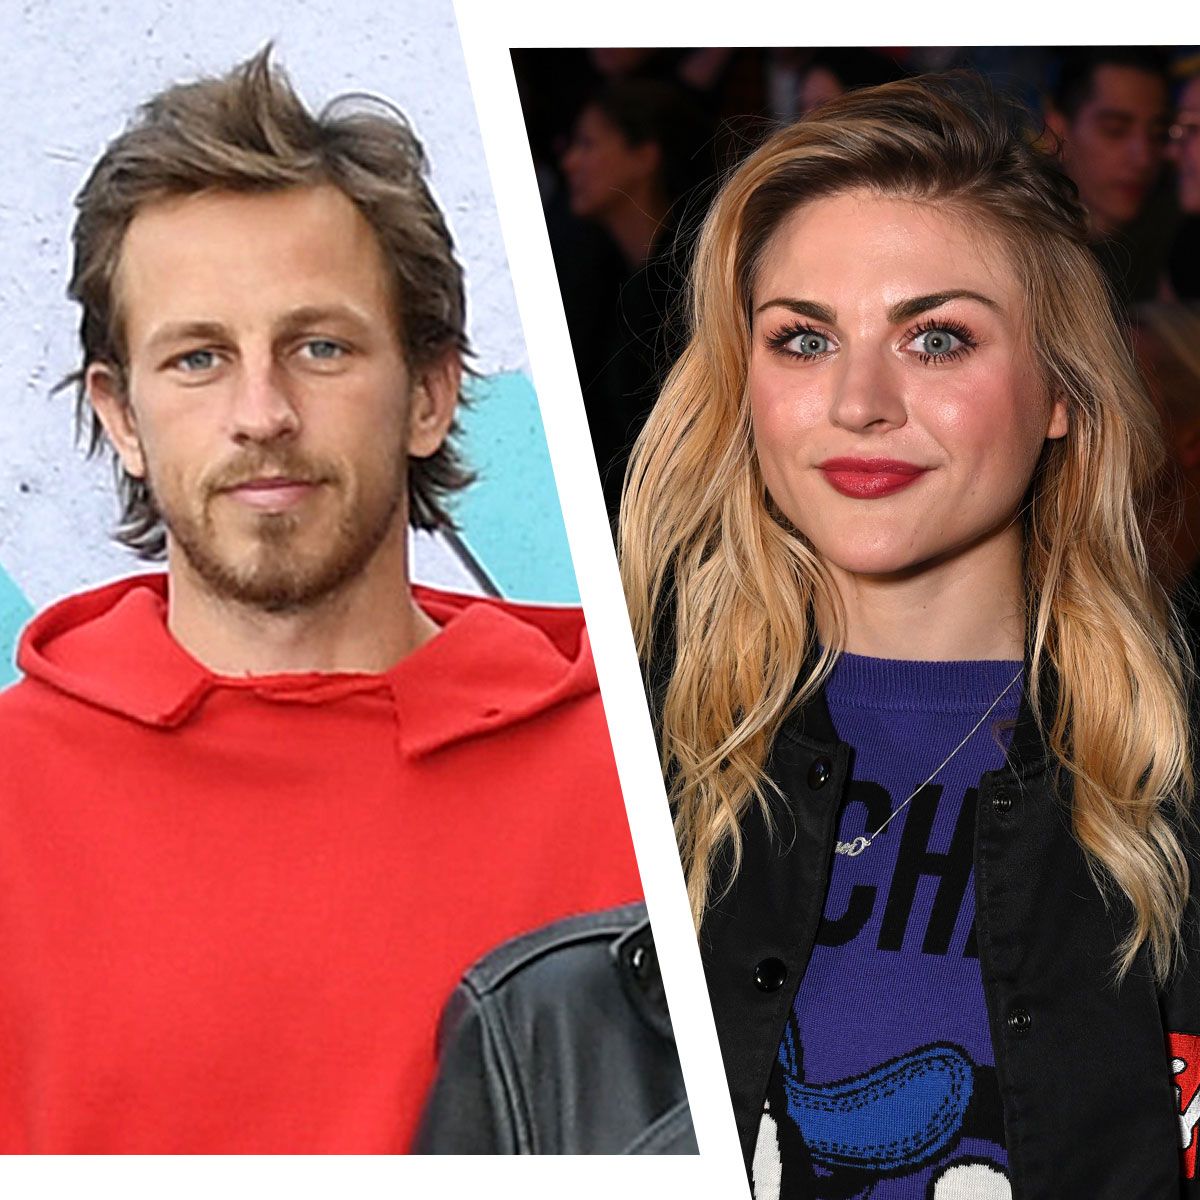 Frances Bean Cobain ties the knot with Riley Hawk in star-studded